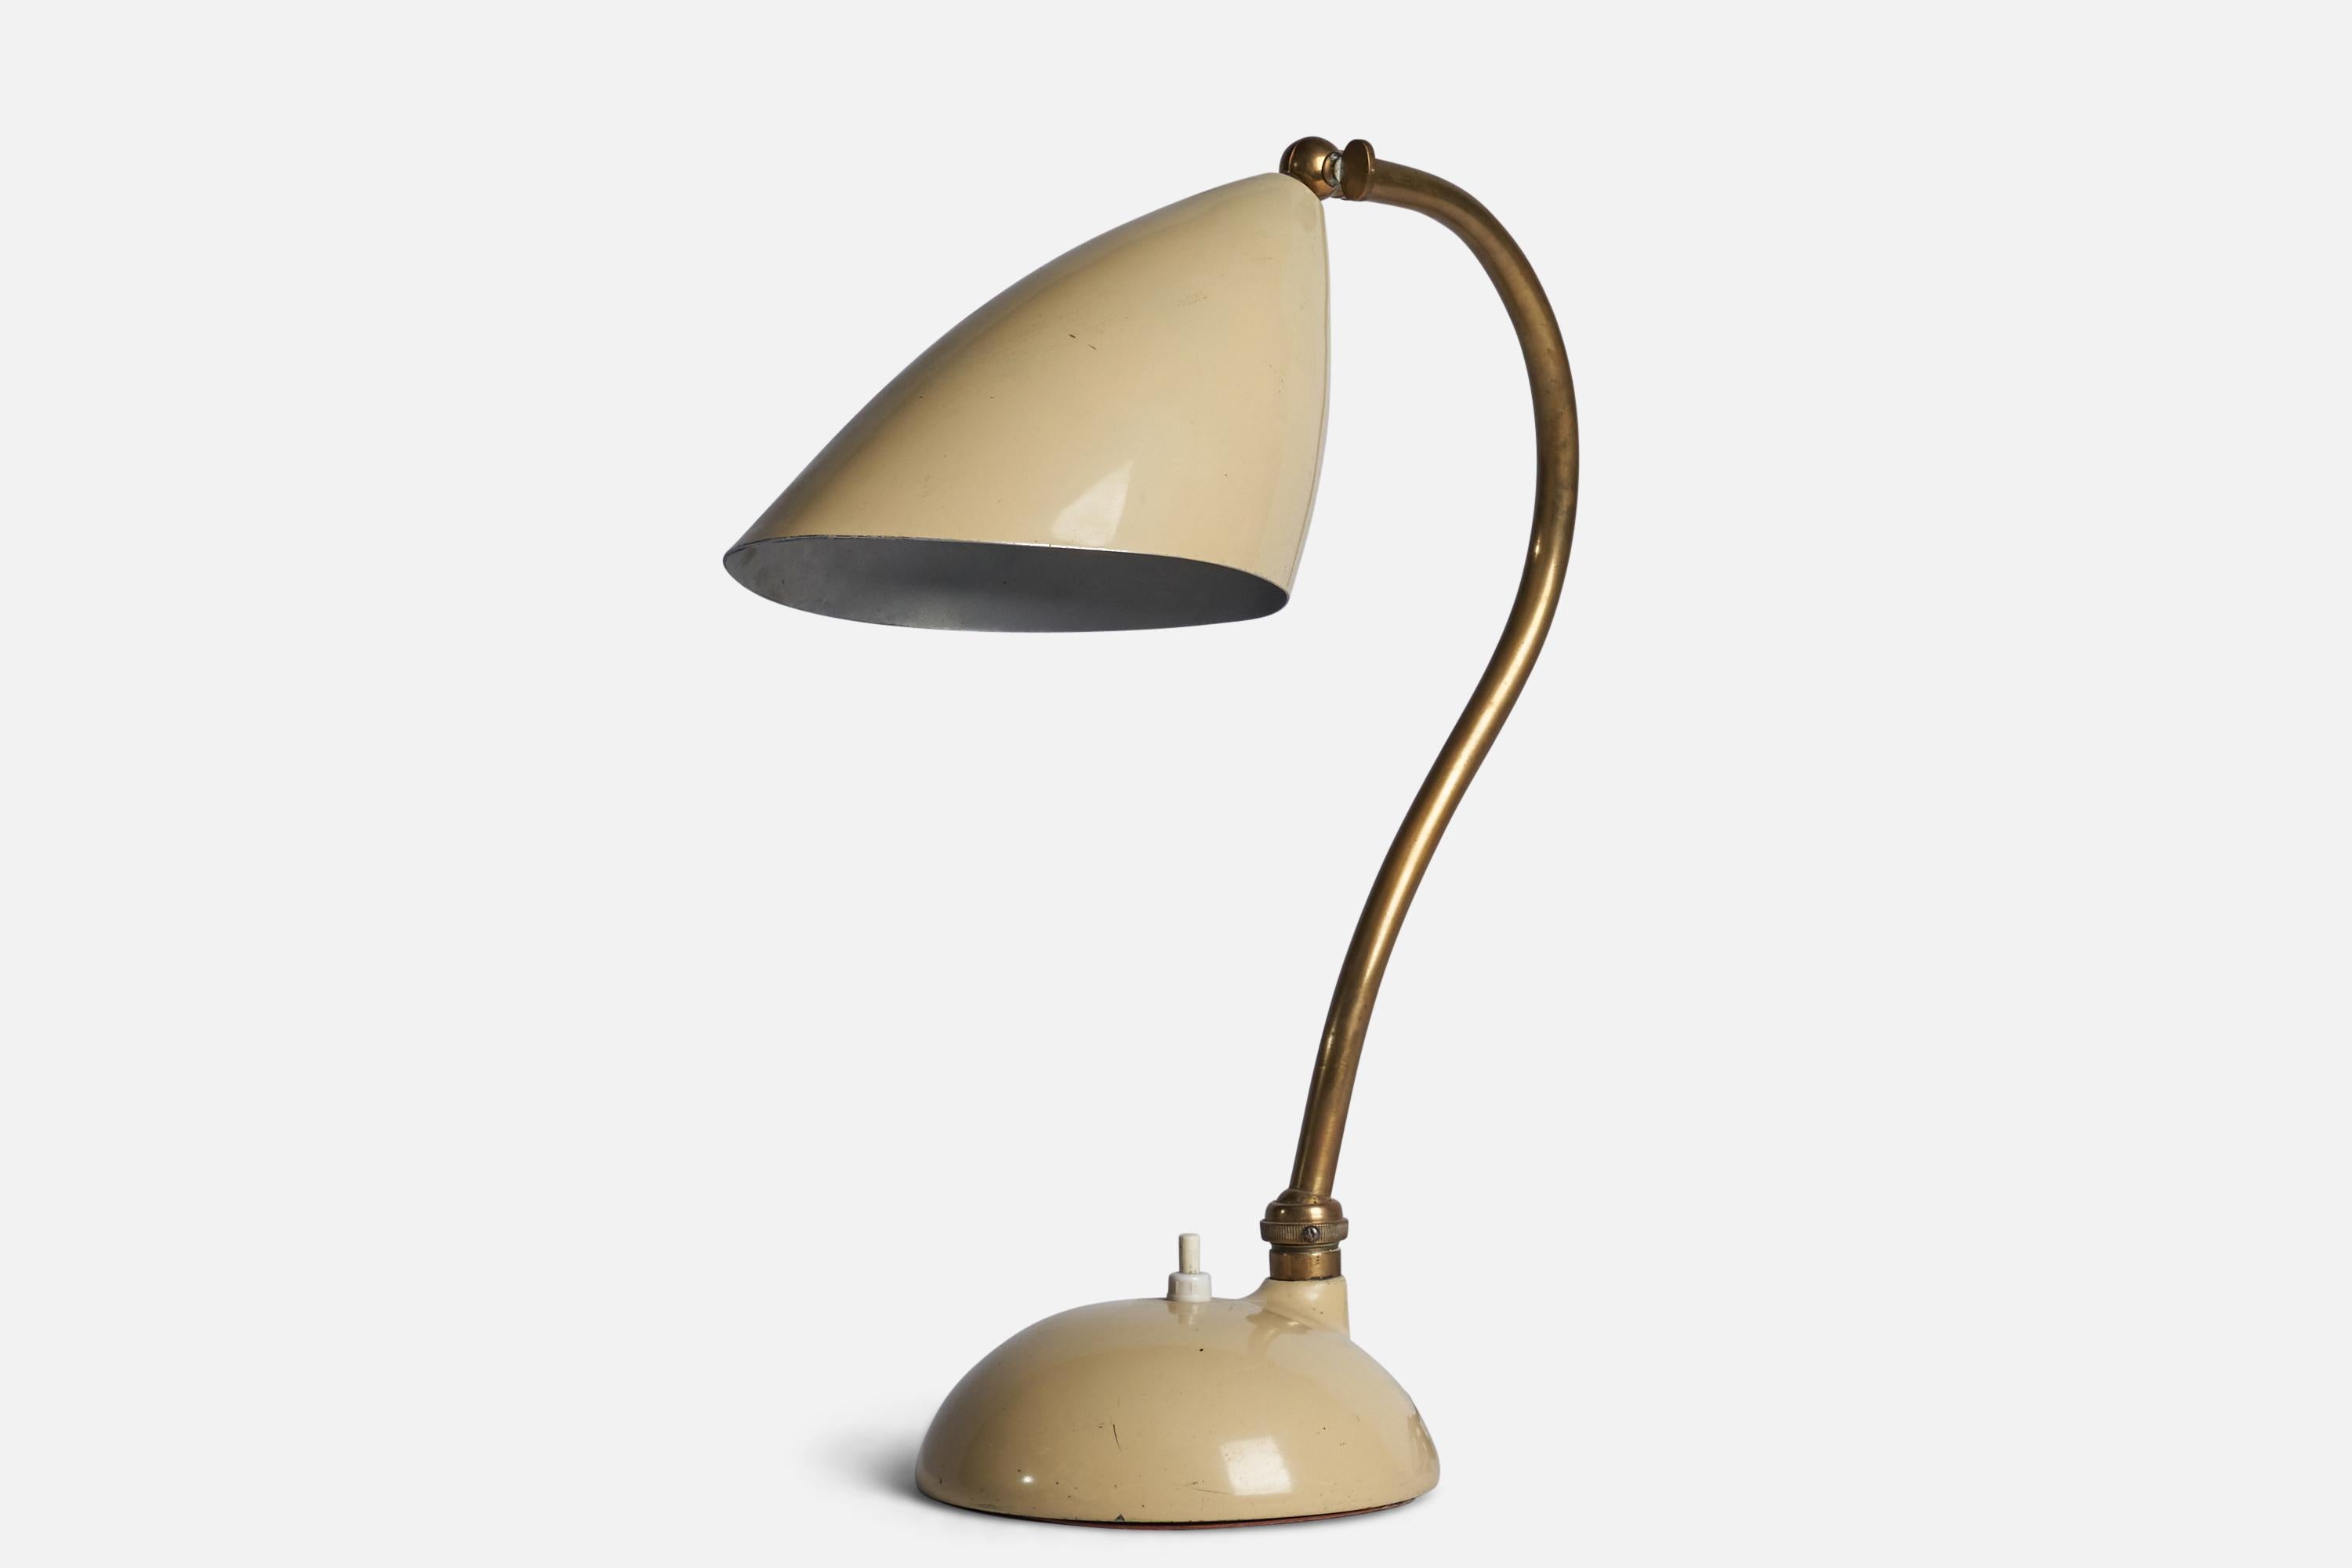 An adjustable brass and beige-lacquered metal table lamp designed and produced in Italy, 1950s.

Overall Dimensions (inches): 15.15” H x 5.95” W x 12” D
Dimensions variable based on position of light.
Bulb Specifications: E-26 Bulb
Number of